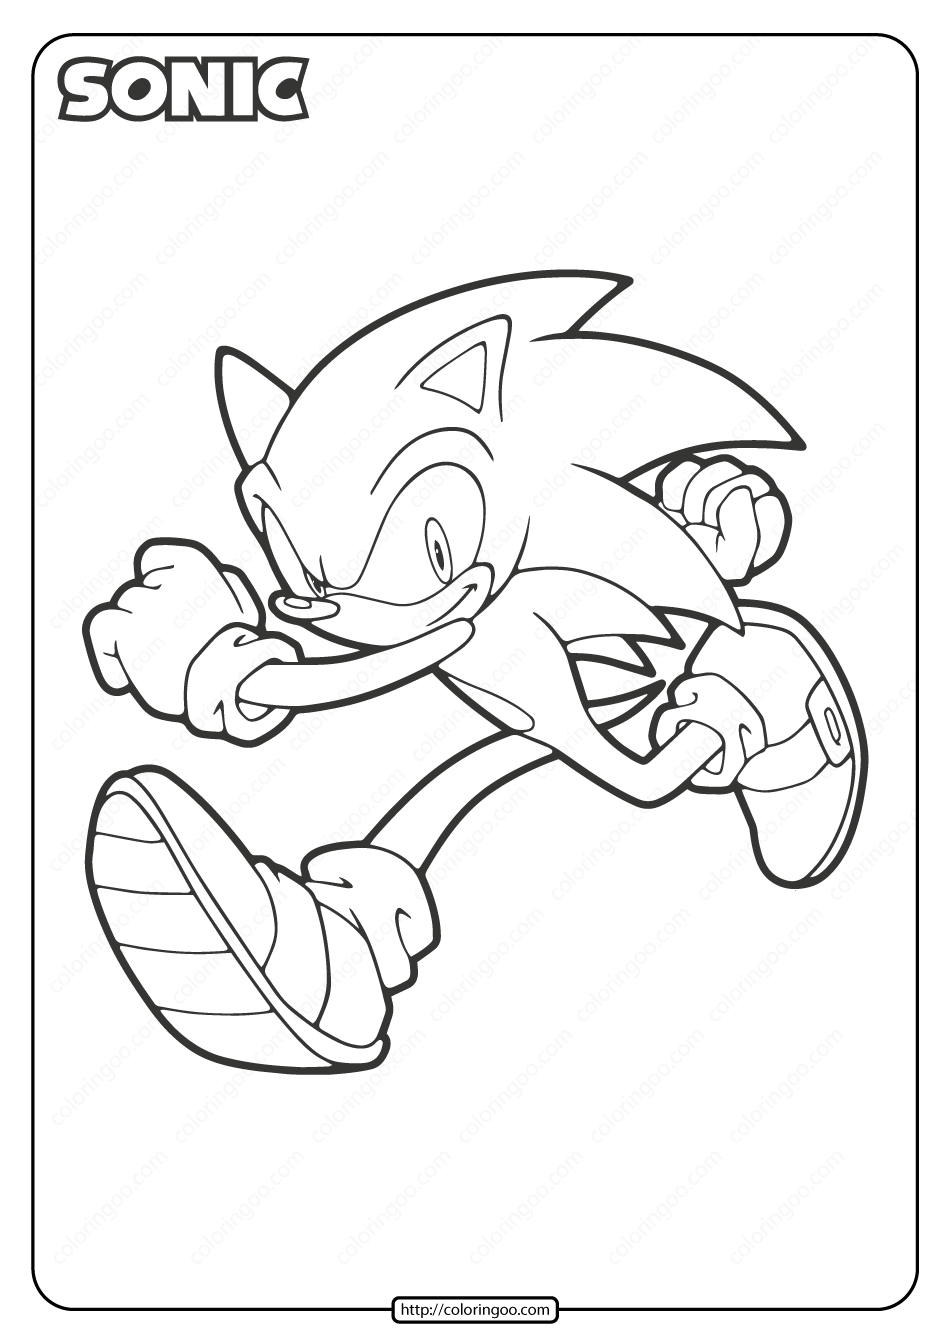 free printable sonic the hedgehog coloring page